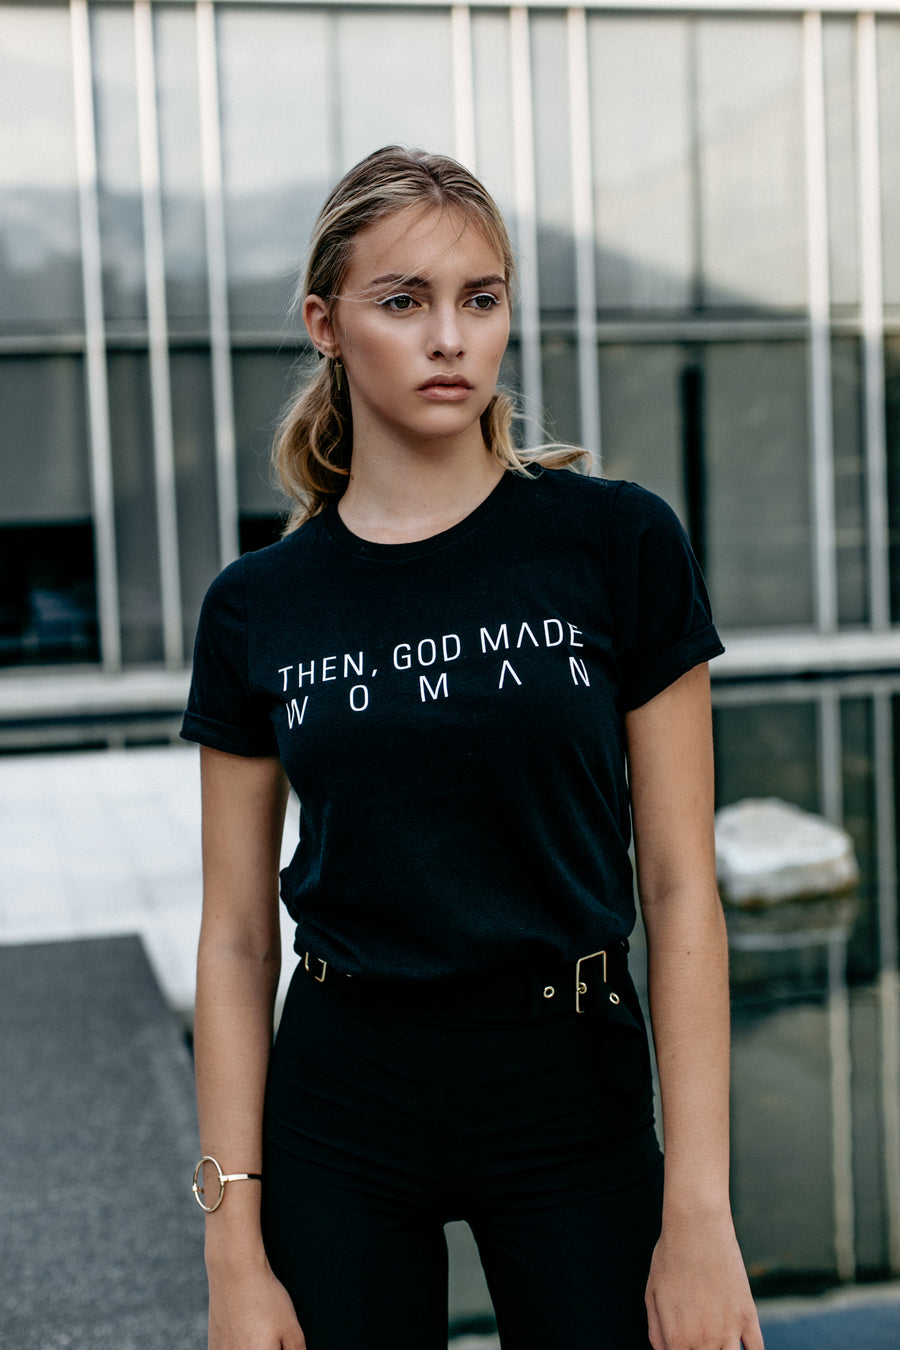 Then, God Made Woman Tee - Black